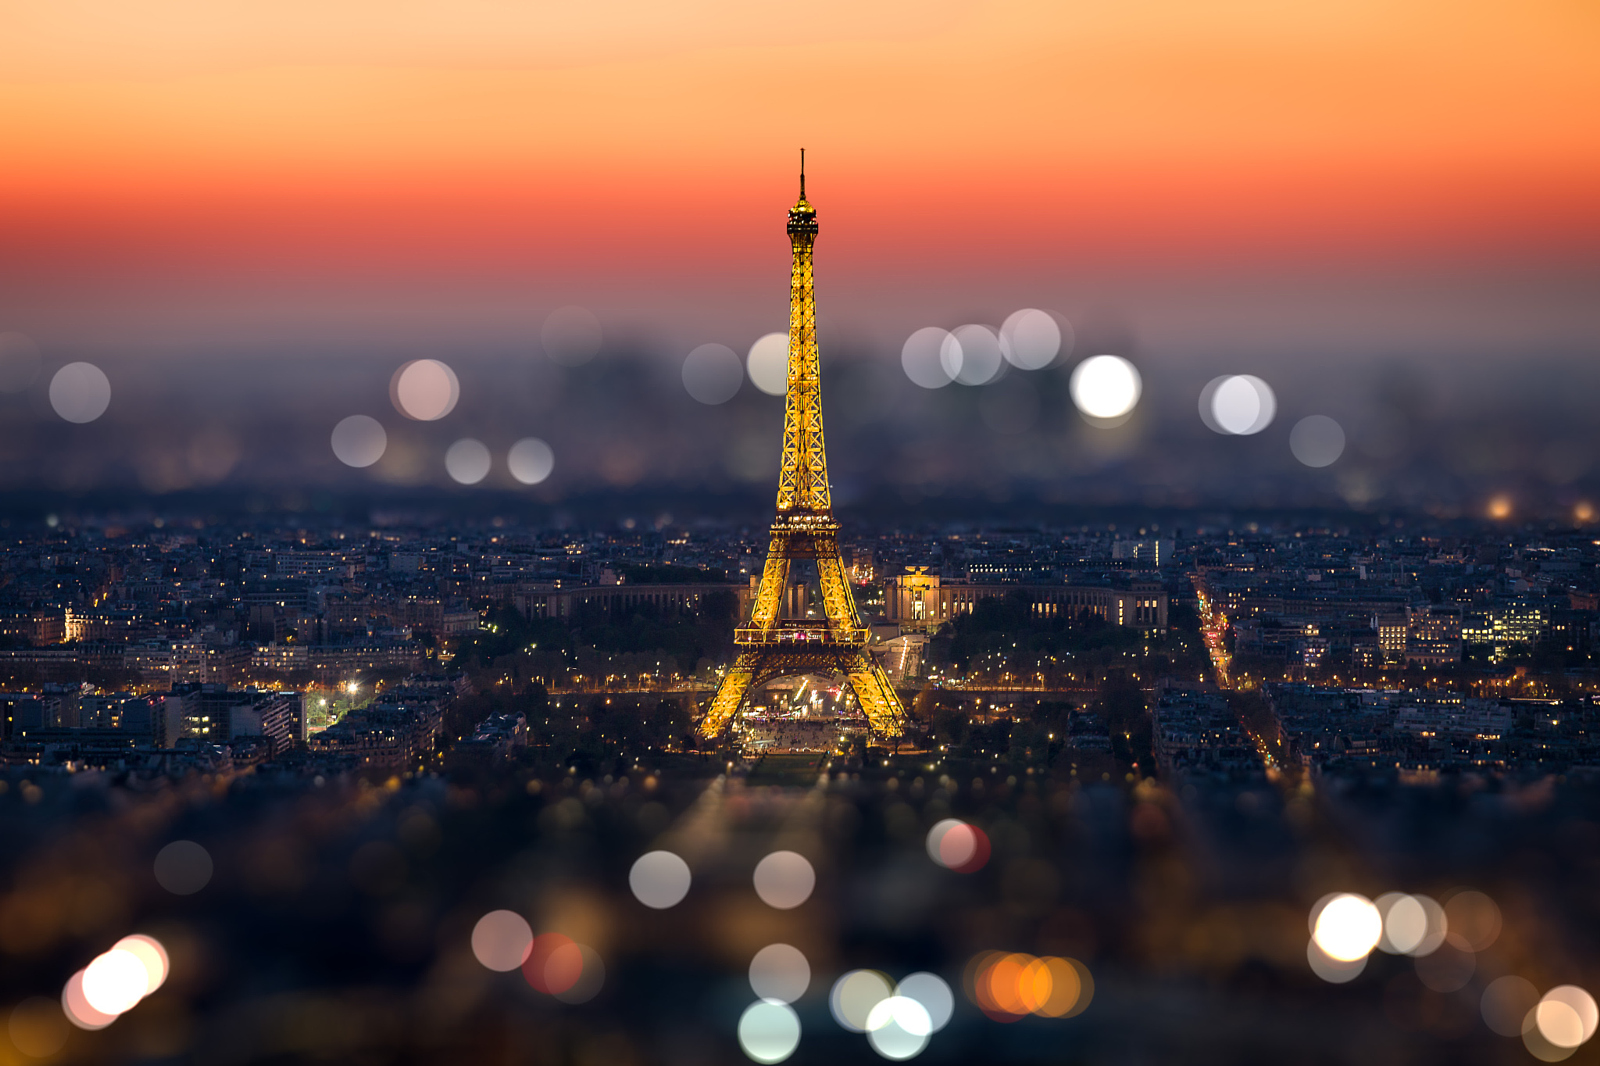 30+ Best Beautiful Bokeh Images & Pictures to Capture Your Imagination